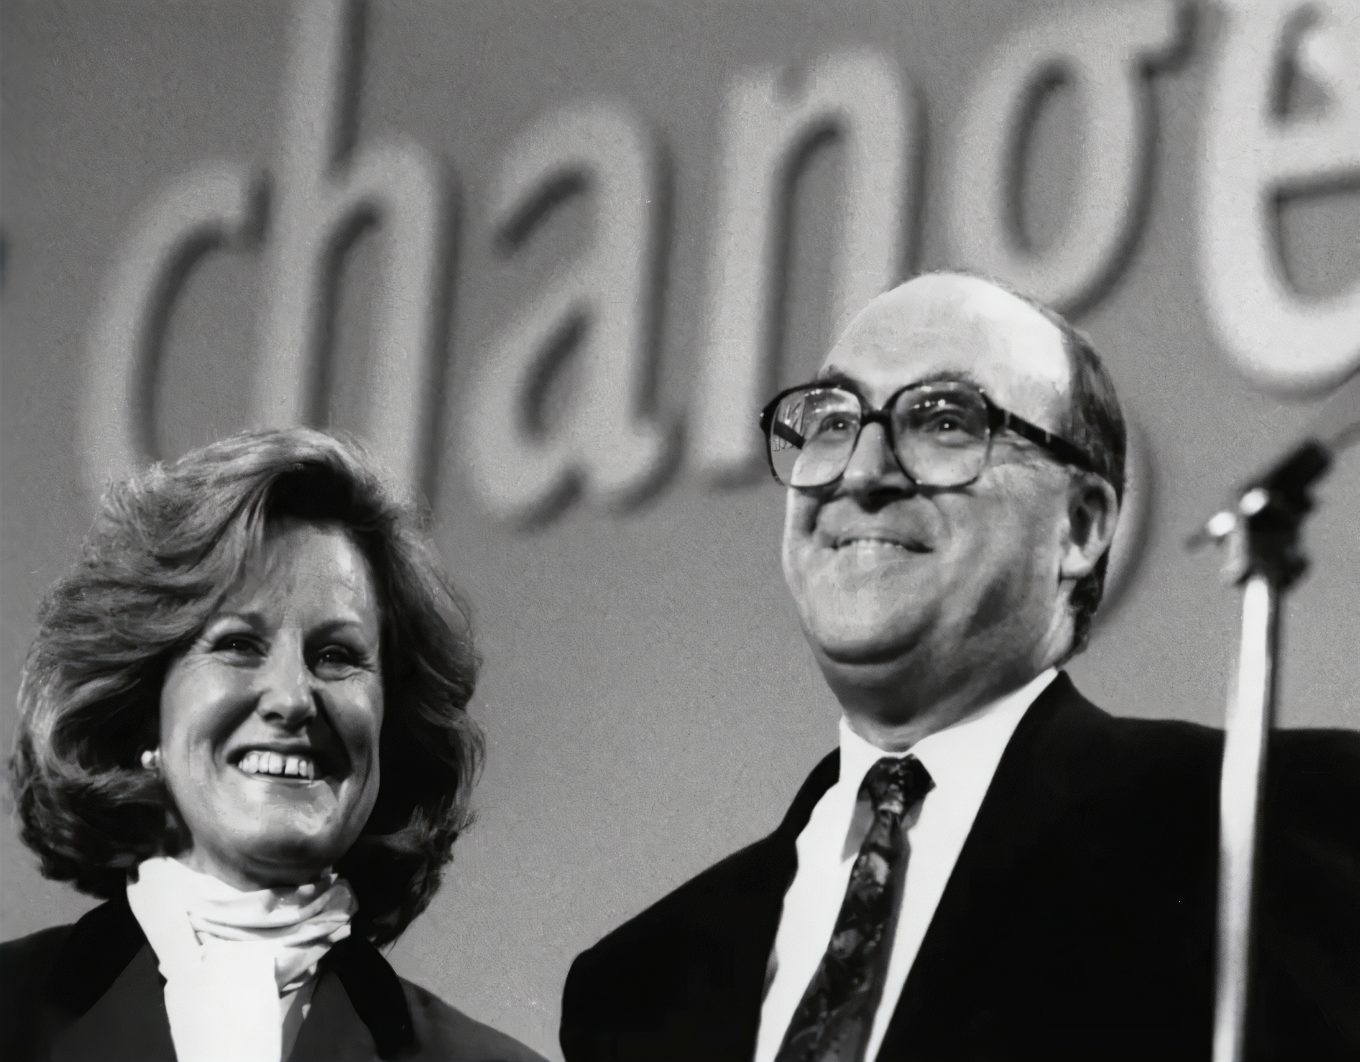 Smith wiith his wife Elizabeth after being elected Leader of the Labour Party July 18th 1992